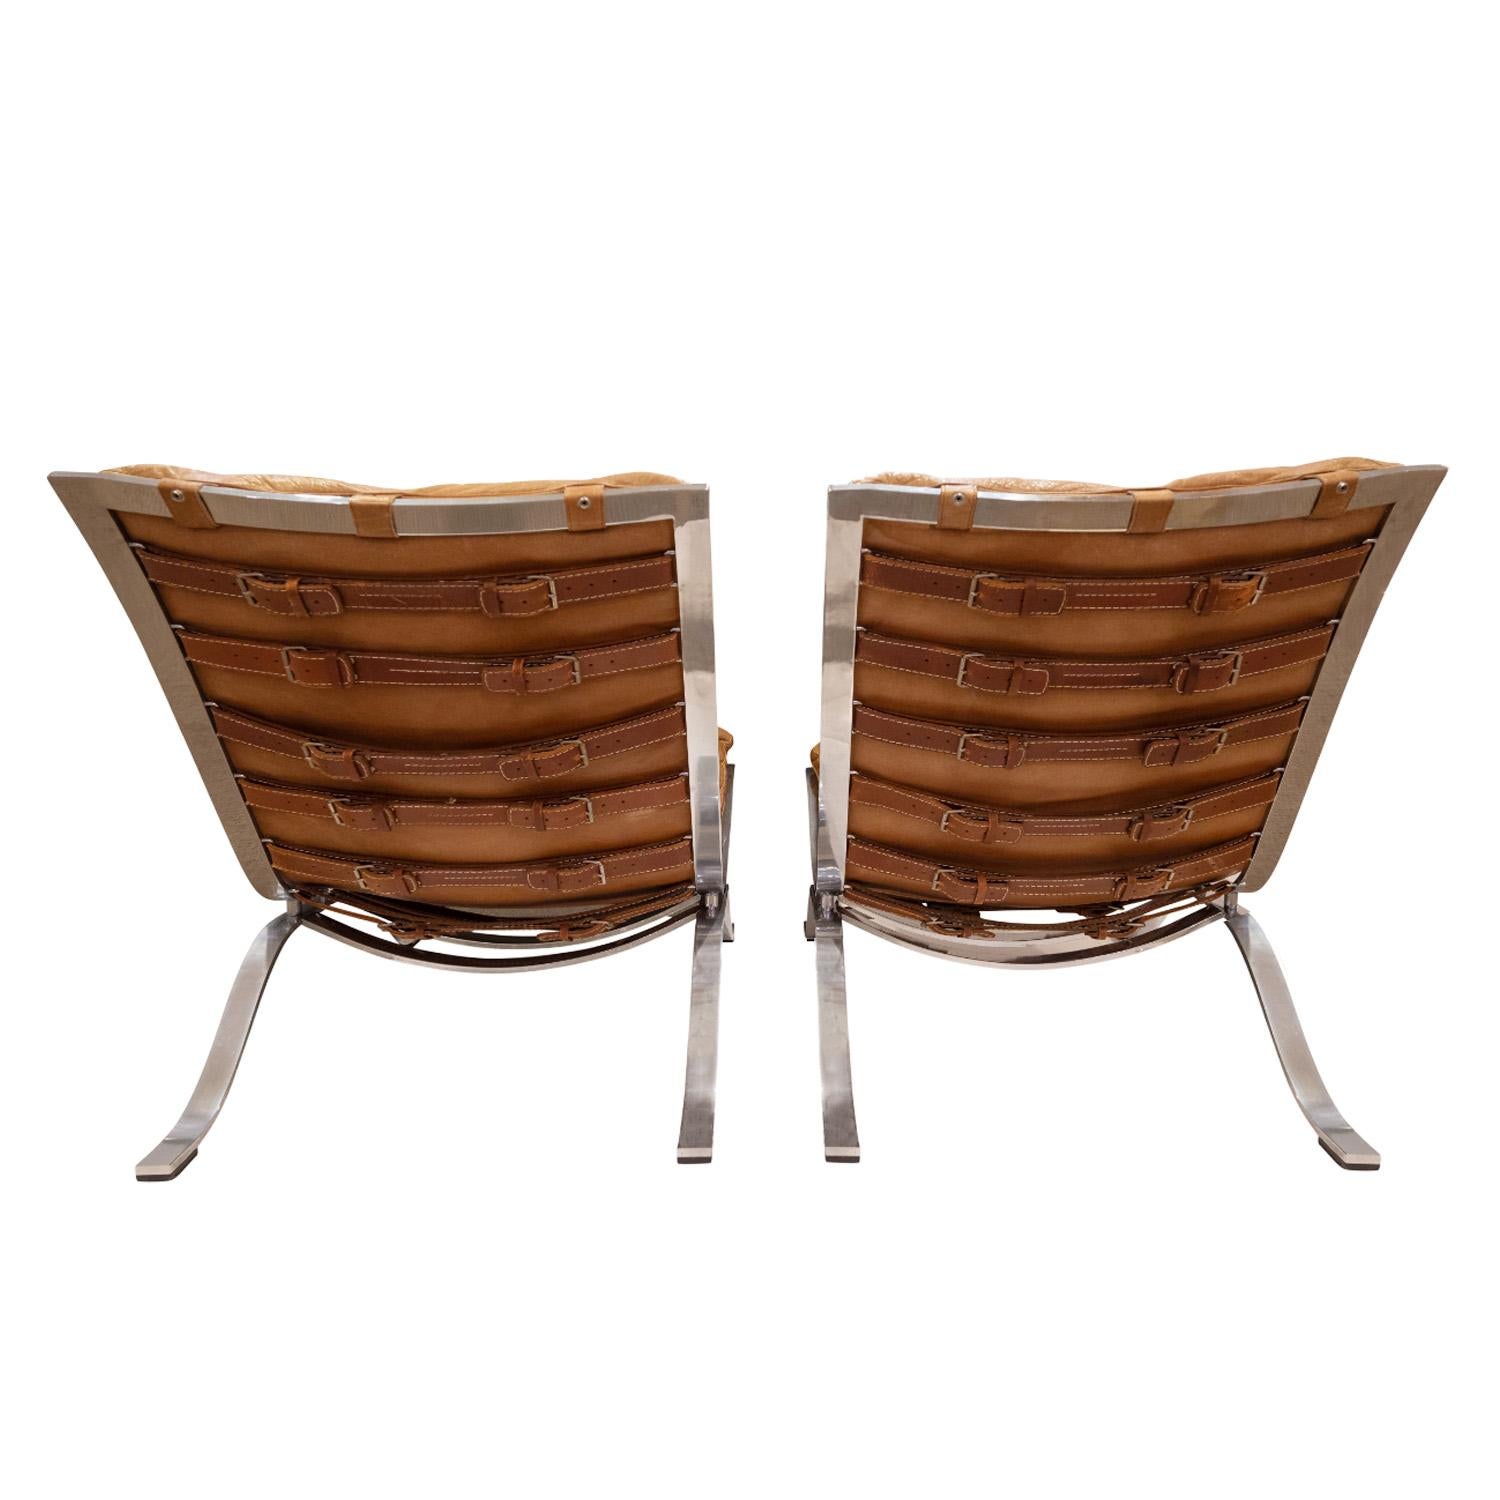 Hand-Crafted Arne Norell Pair of Lounge Chairs with Original Leather Slings 1960s (Signed) For Sale